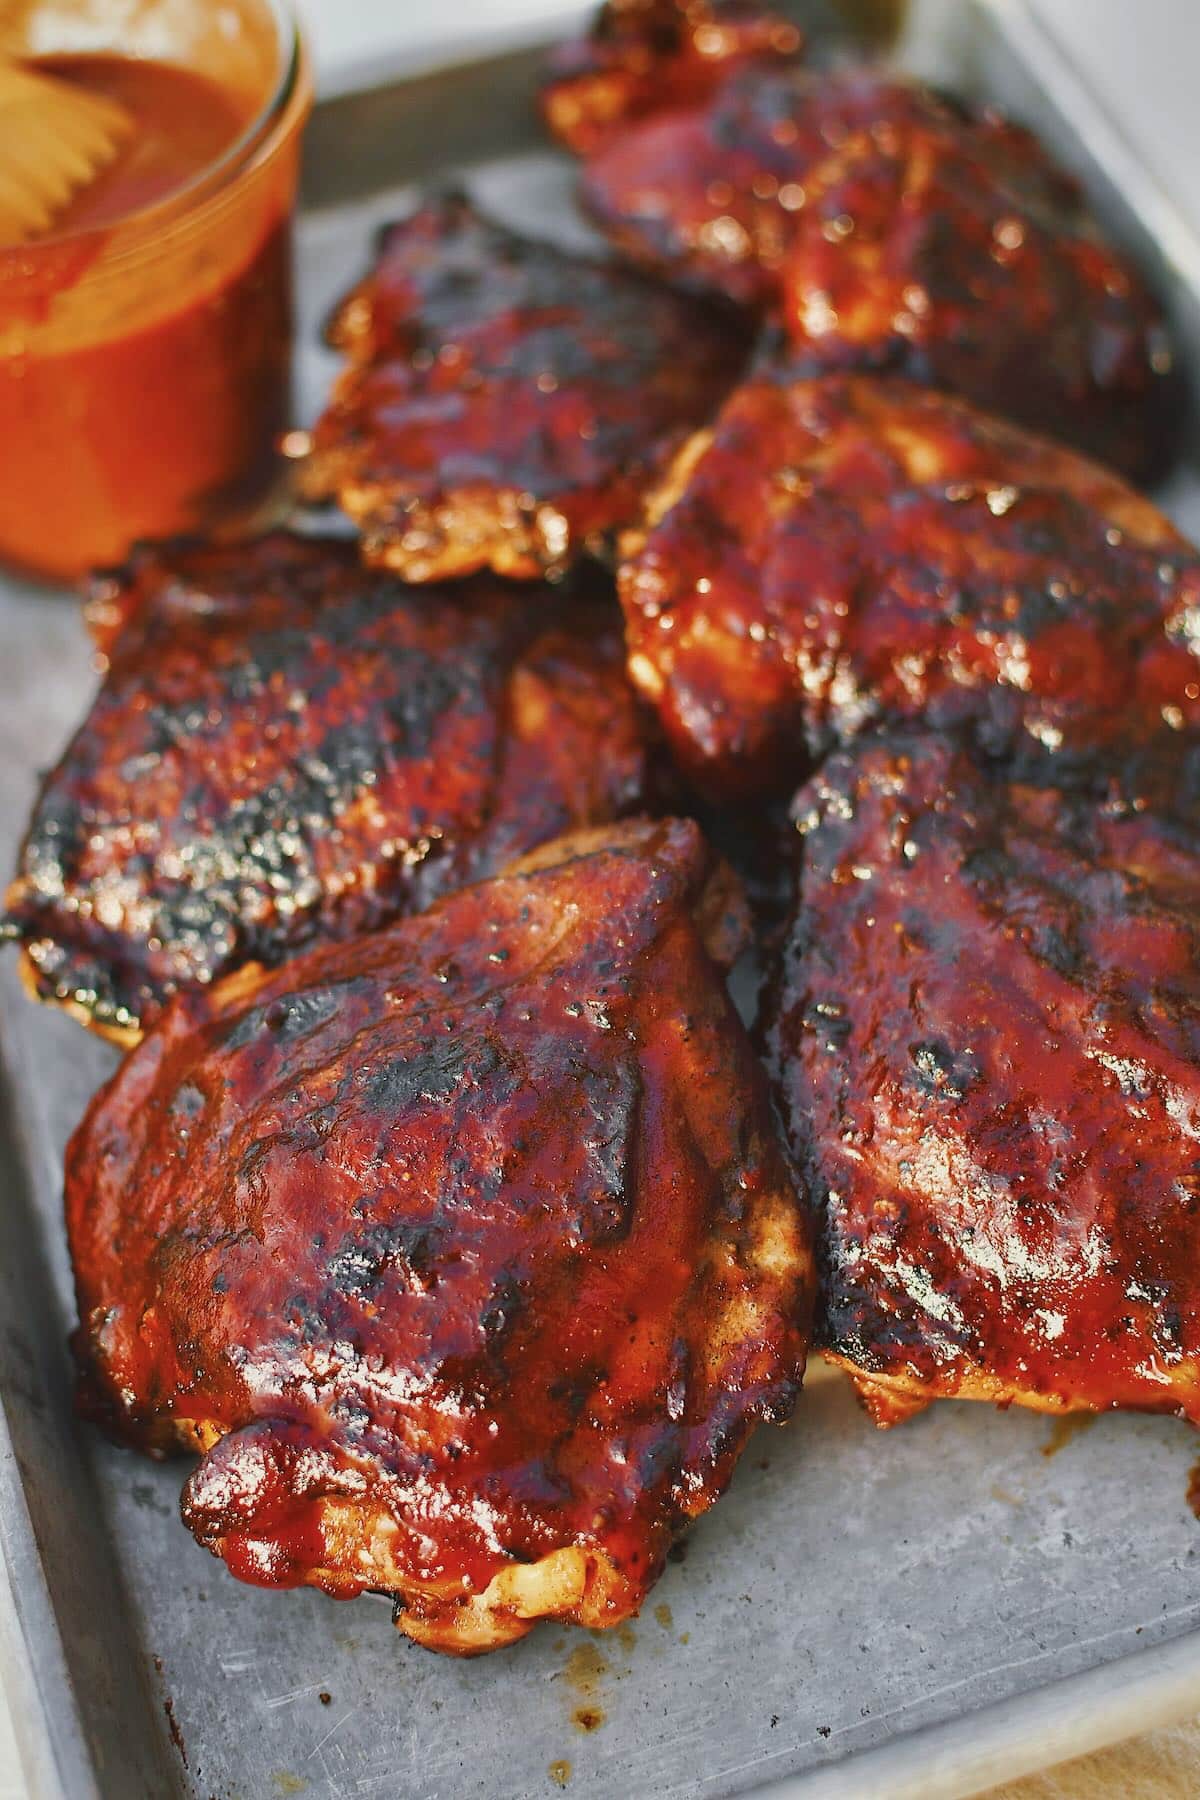 Grilled Chicken Thighs fresh off the grill and slathered in bbq sauce.